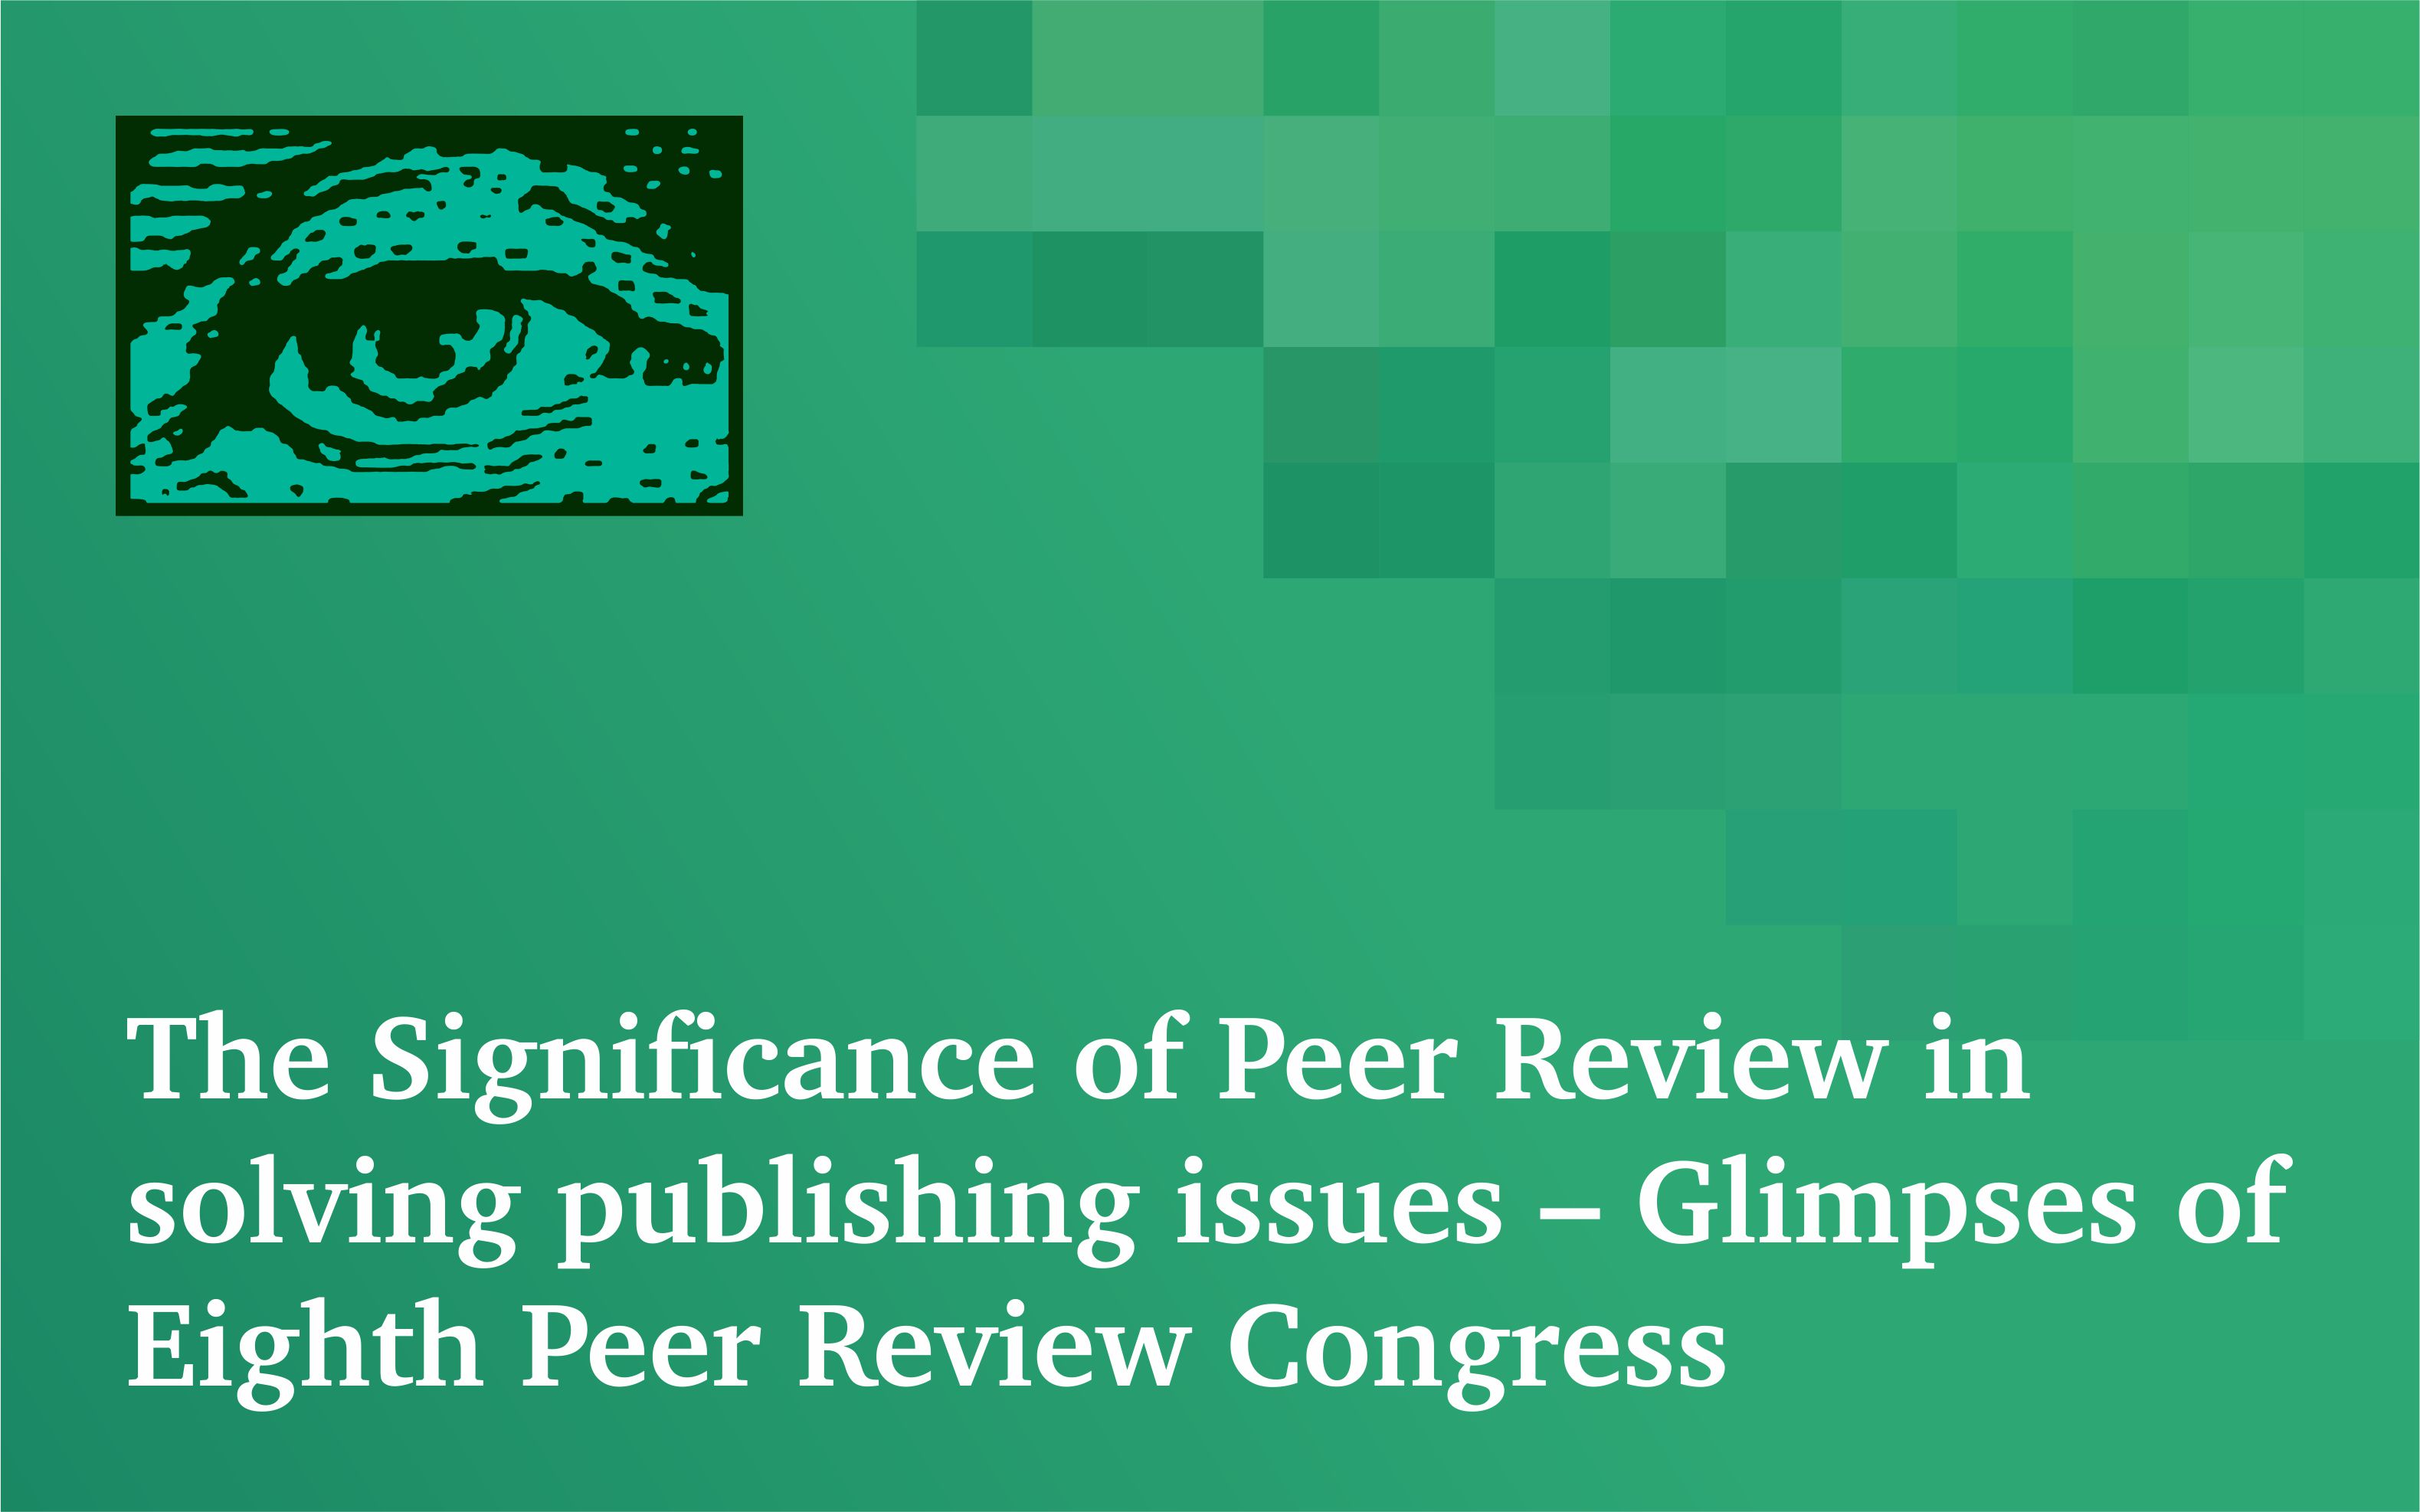 The Significance of Peer Review in solving publishing issues – Glimpses of Eighth Peer Review Congress